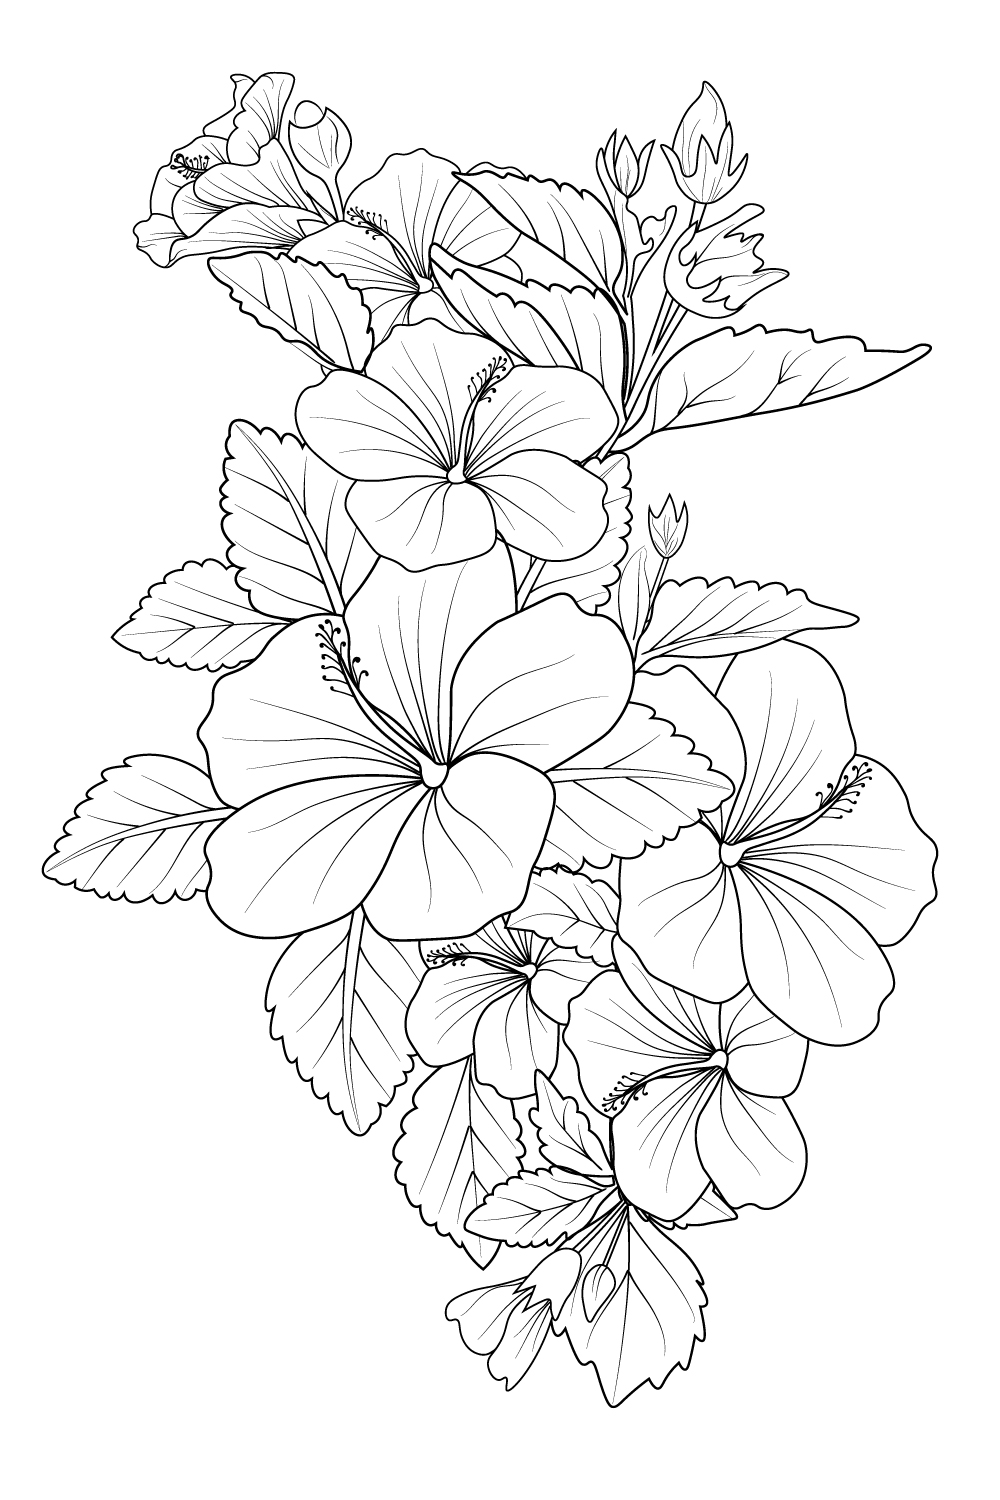 Hibiscus flower bouquet of vector sketch hand drawn illustration, natural collection branch of leaves bud pinterest preview image.